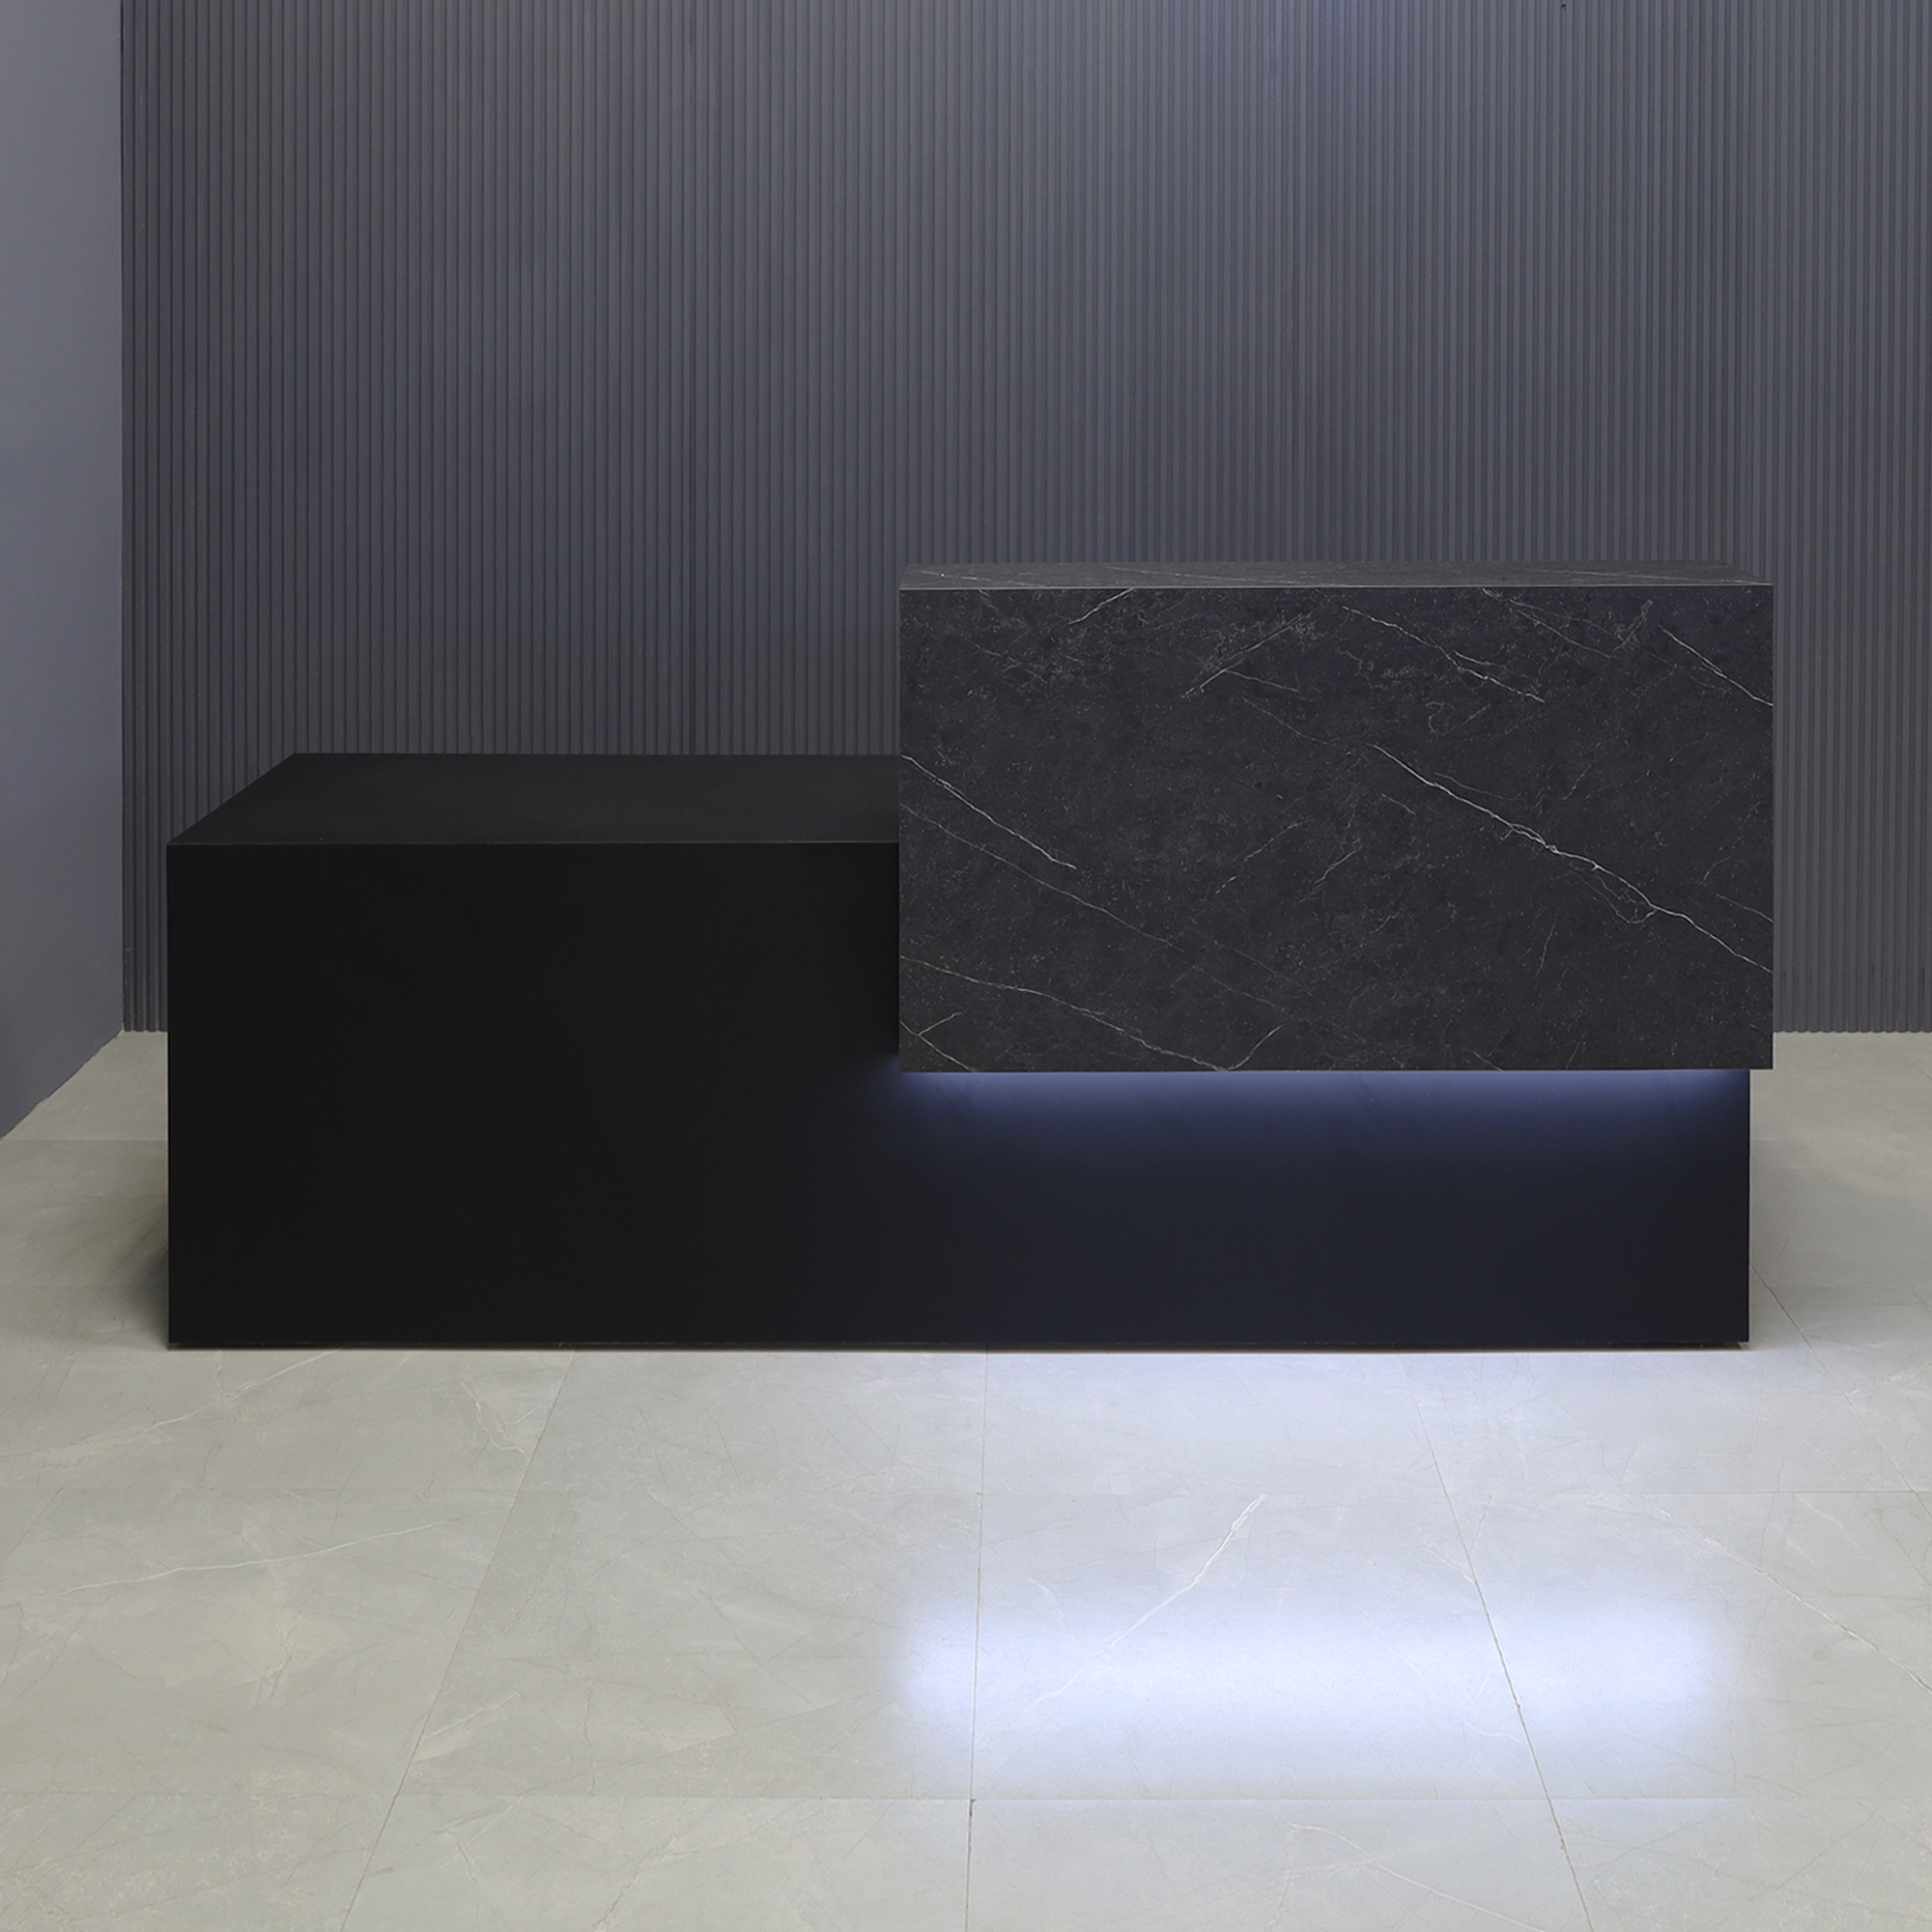 90-inch Los Angeles ADA Compliant Custom Reception Desk, right side when facing front in black stone PVC counter and black traceless laminate desk, with warm white LED, shown here.